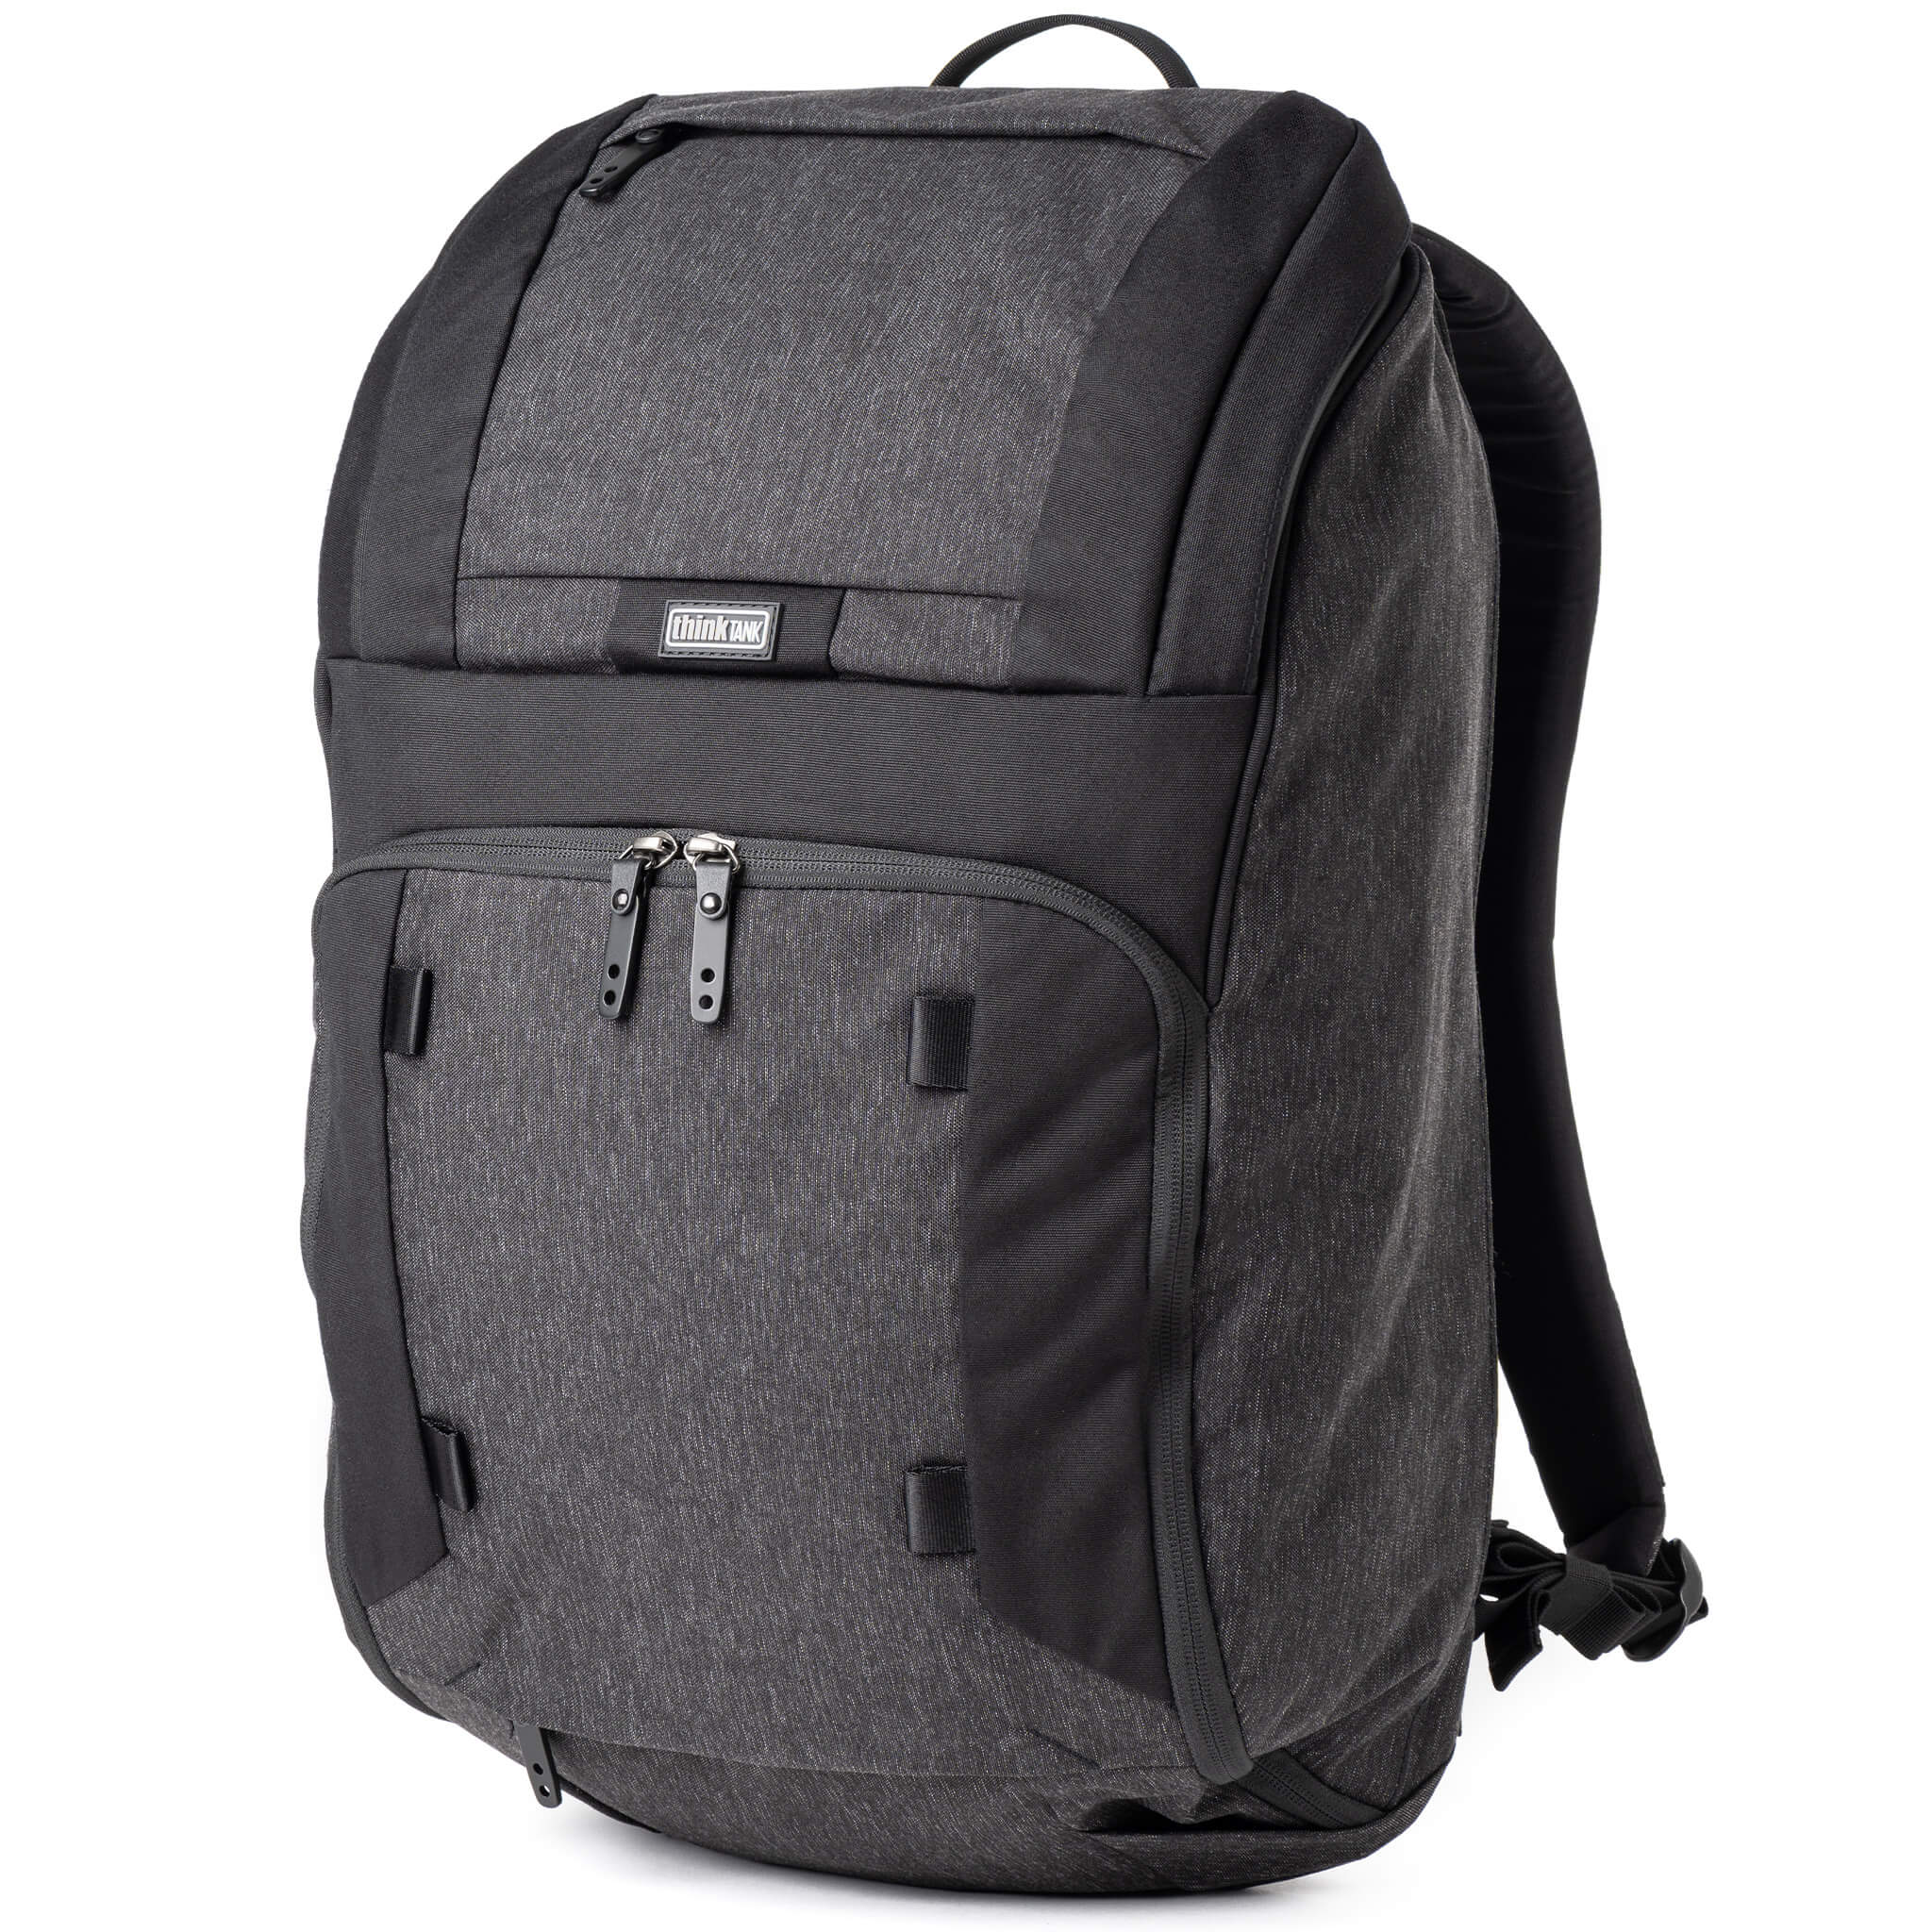 The SpeedTop backpack series takes quick access to the next level!